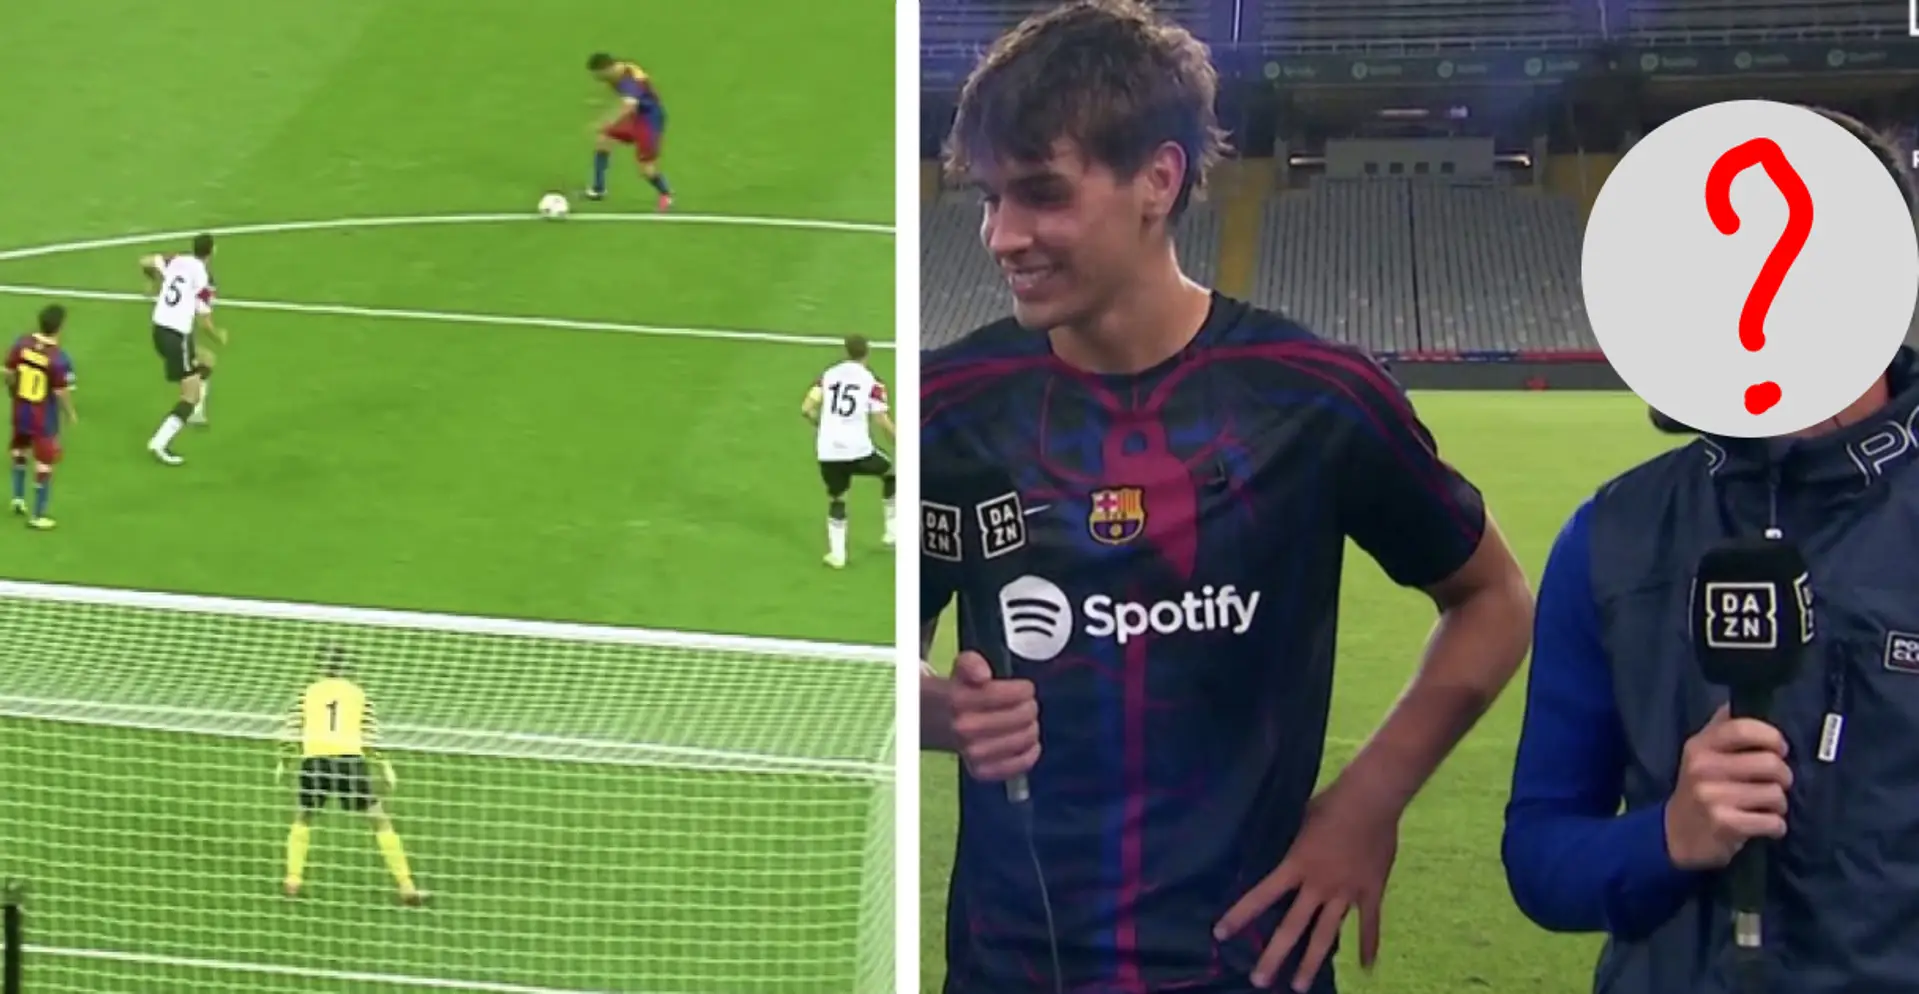 Marc Guiu meets Barca icon at full time v Bilbao – he looks so happy 